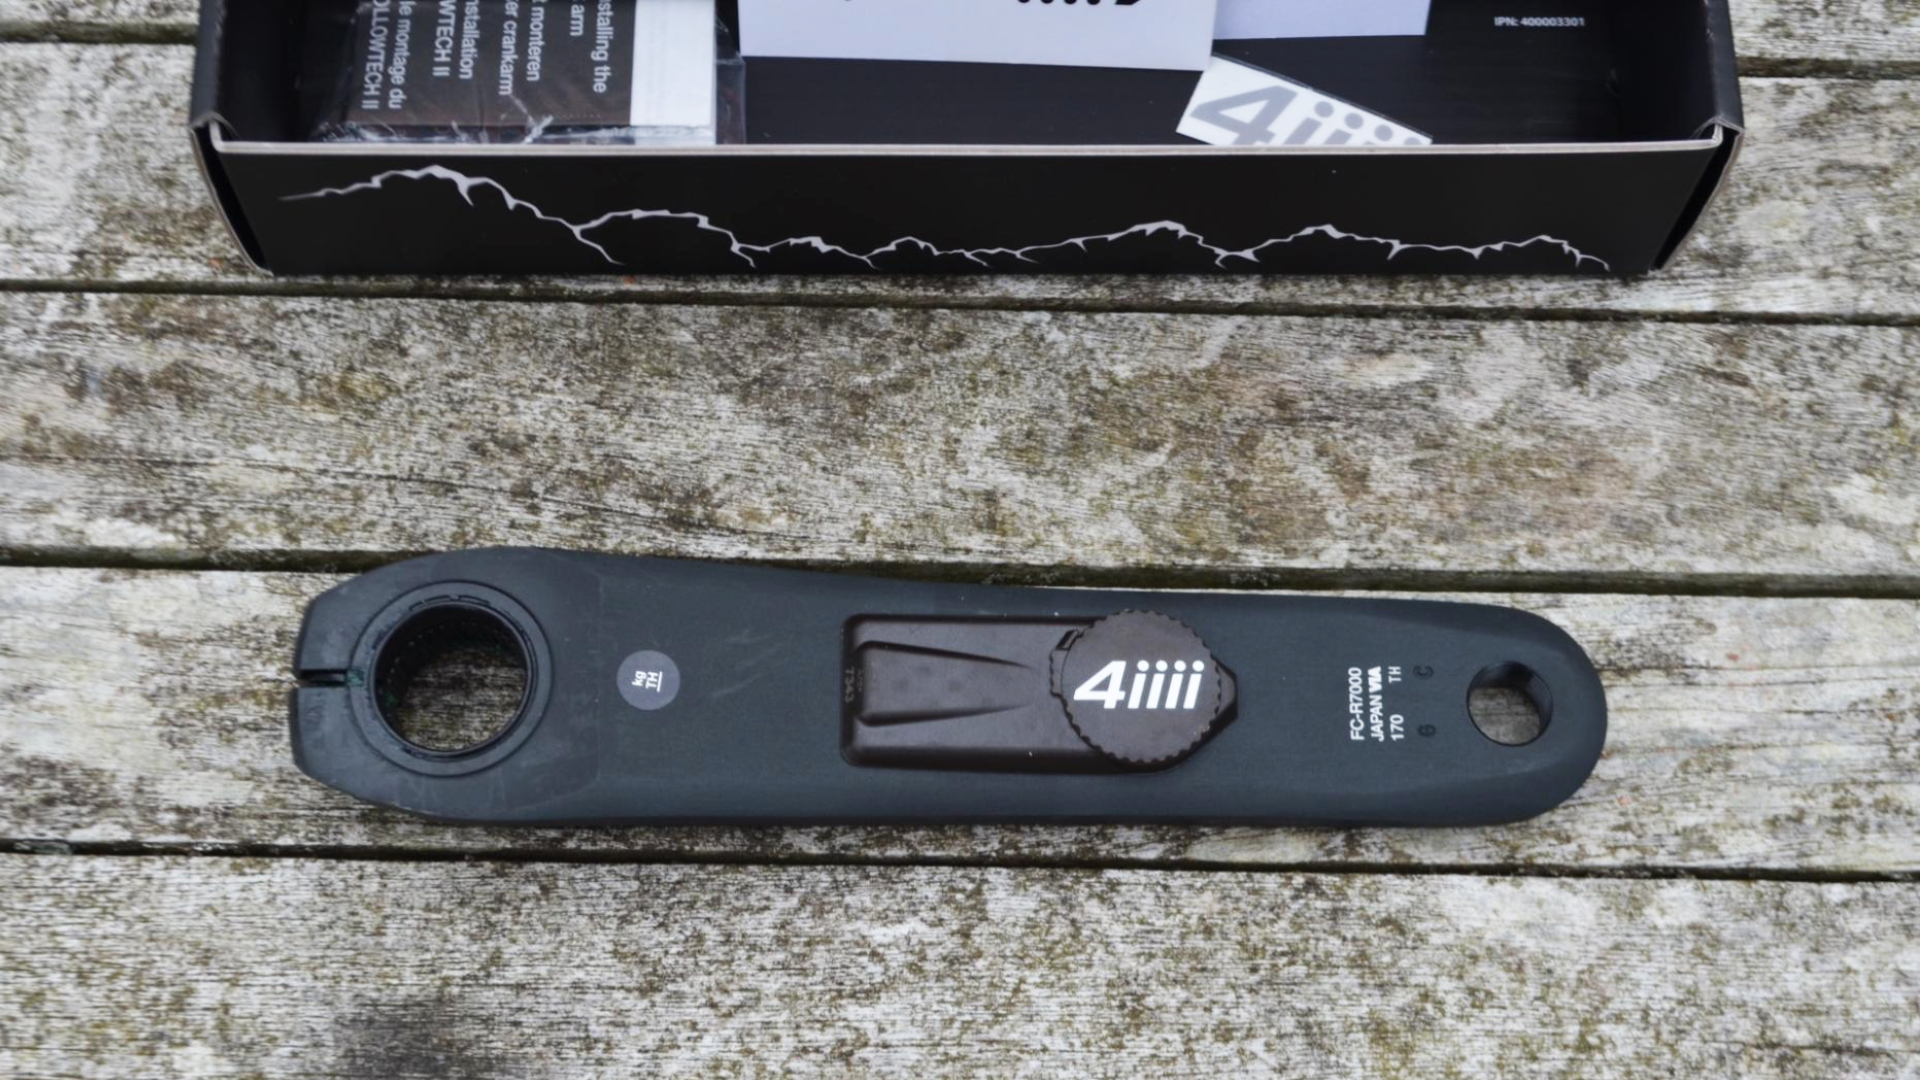 Images show 4iiii's Precision 3.0 105 R7000 one-way power meter.